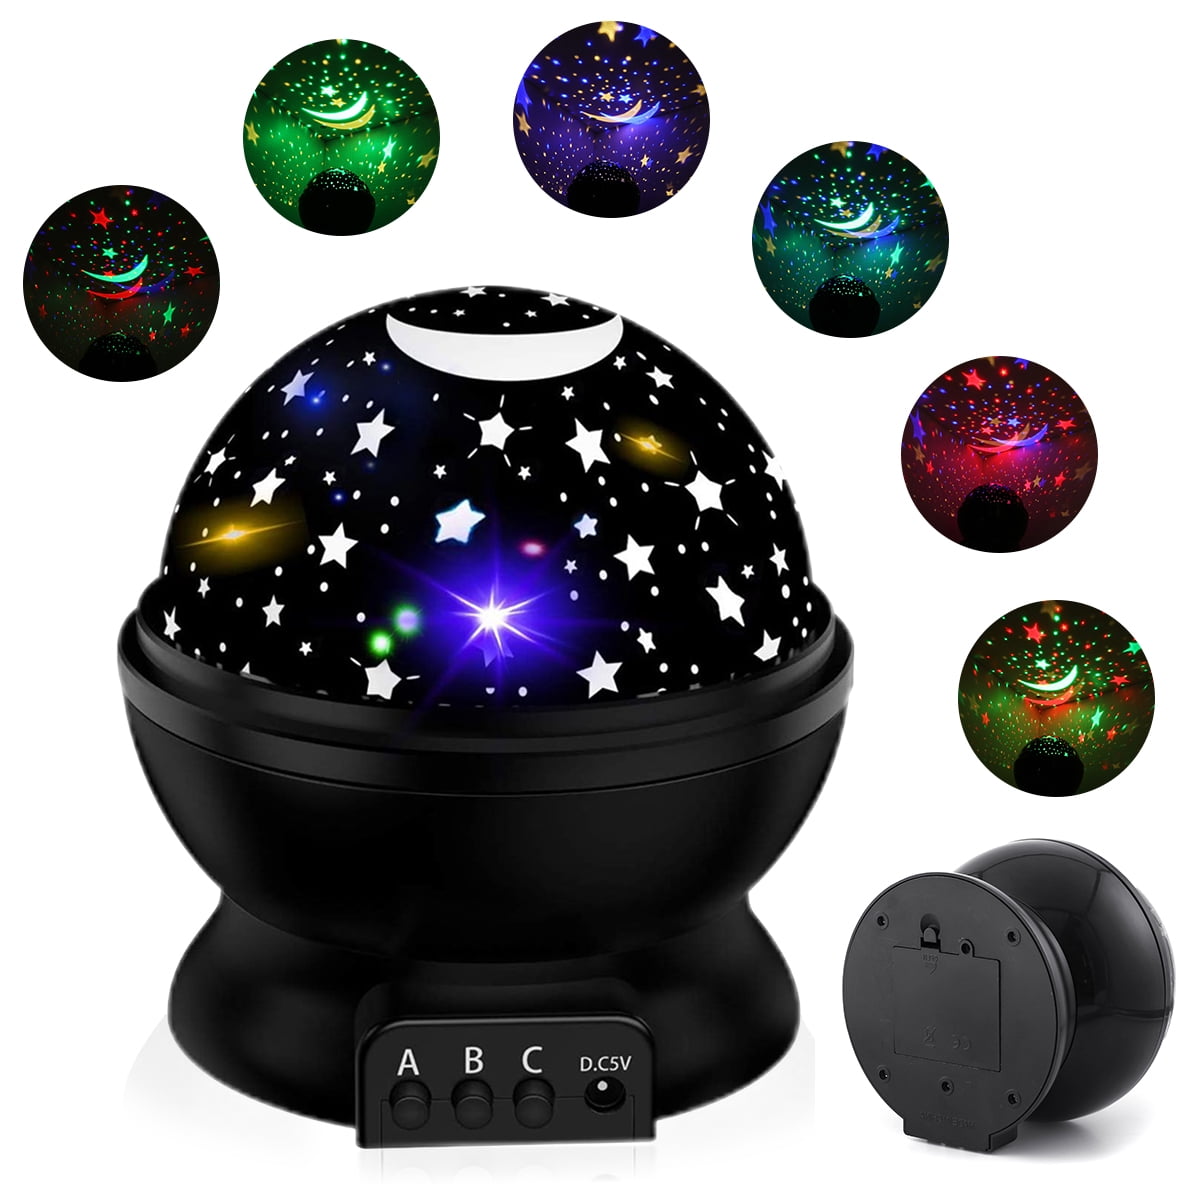 Details about   Romantic LED Starry Night Sky Projector Lamp Star light Cosmos Master Kids Gift 